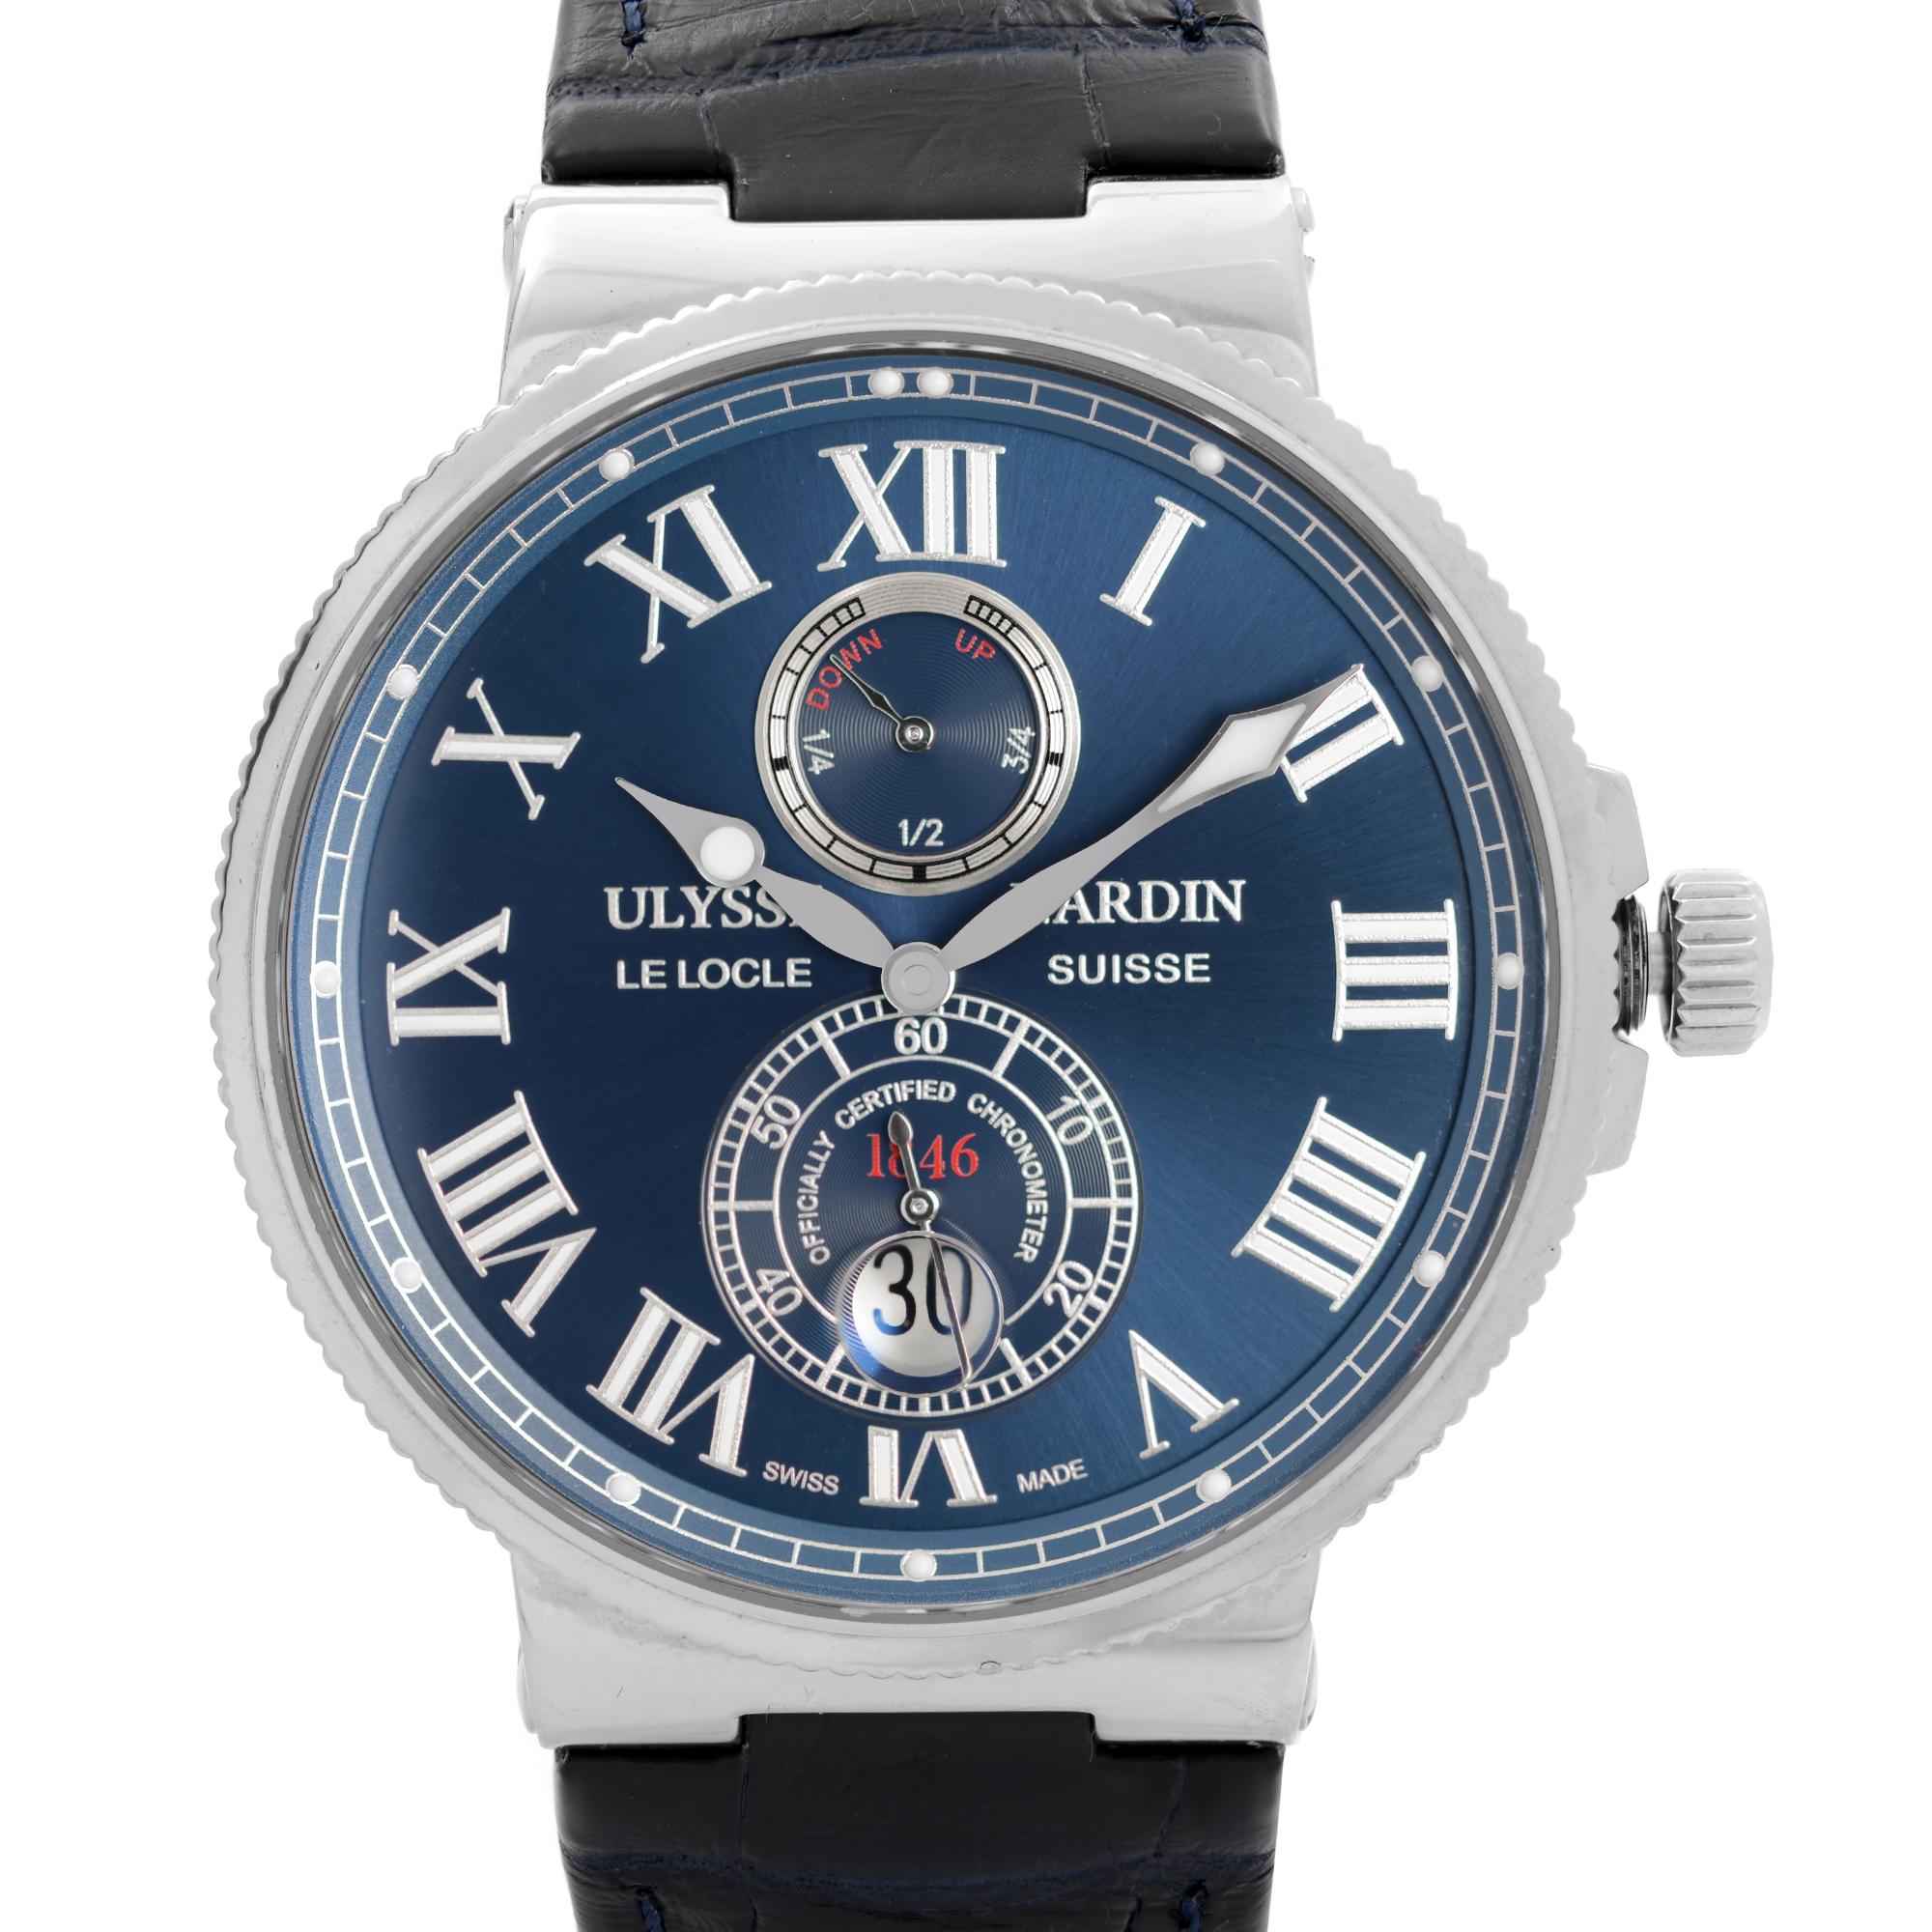 Pre Owned Ulysse Nardin Marine Stainless Steel Blue Arabic Dial Automatic Mens Watch 263-67-7/43. This Beautiful Timepiece is Powered by Mechanical (Automatic) Movement And Features: Round Stainless Steel Case with a Blue Leather Strap, Fixed